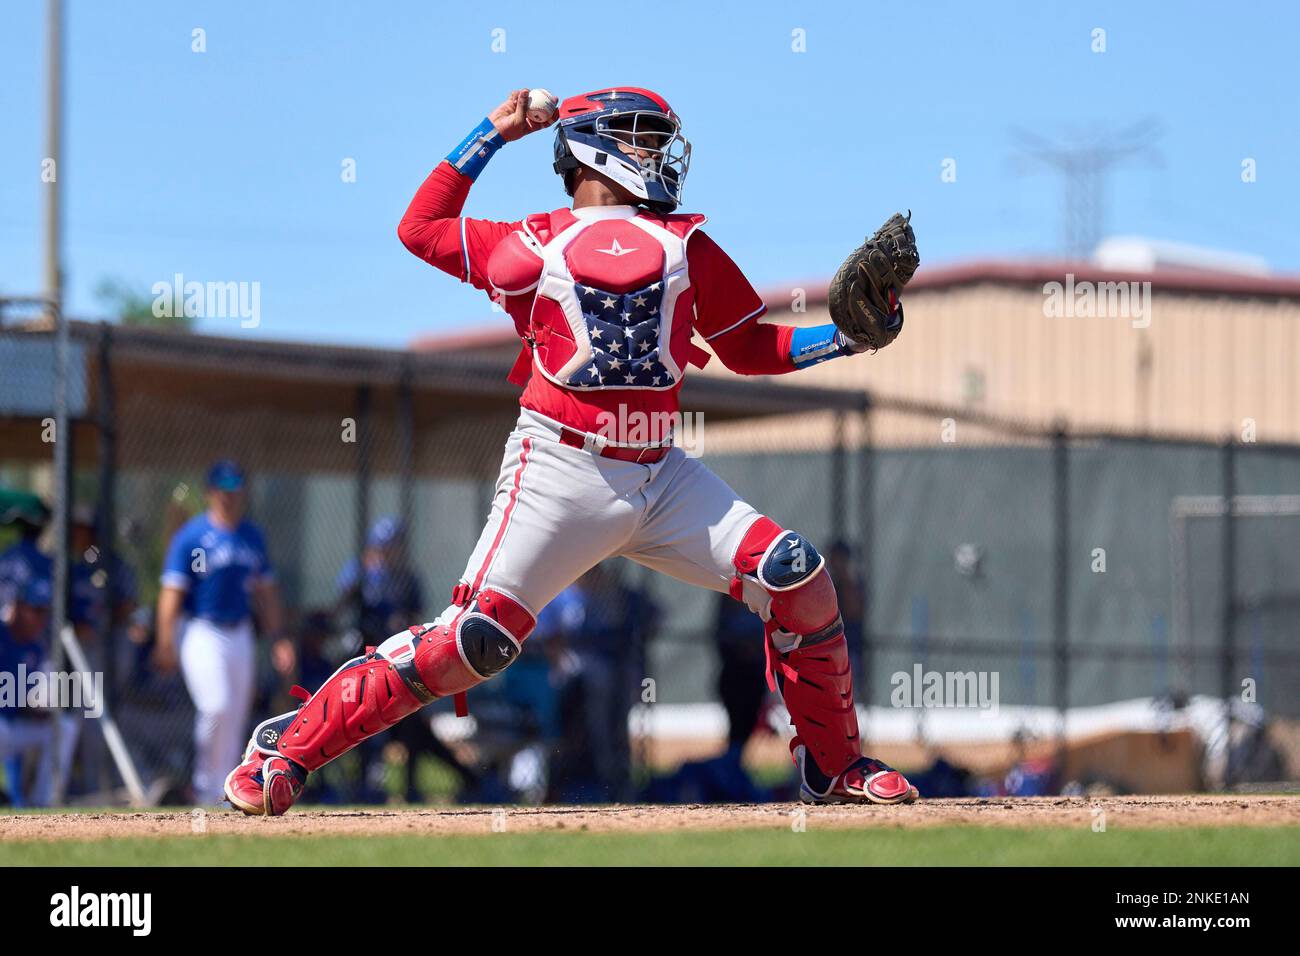 Philadelphia Phillies catcher Rickardo Perez (37) during a MiLB Spring  Training game against the Toronto Blue Jays on March 20, 2022 at the  Carpenter Complex in Clearwater, Florida. (Mike Janes/Four Seam Images